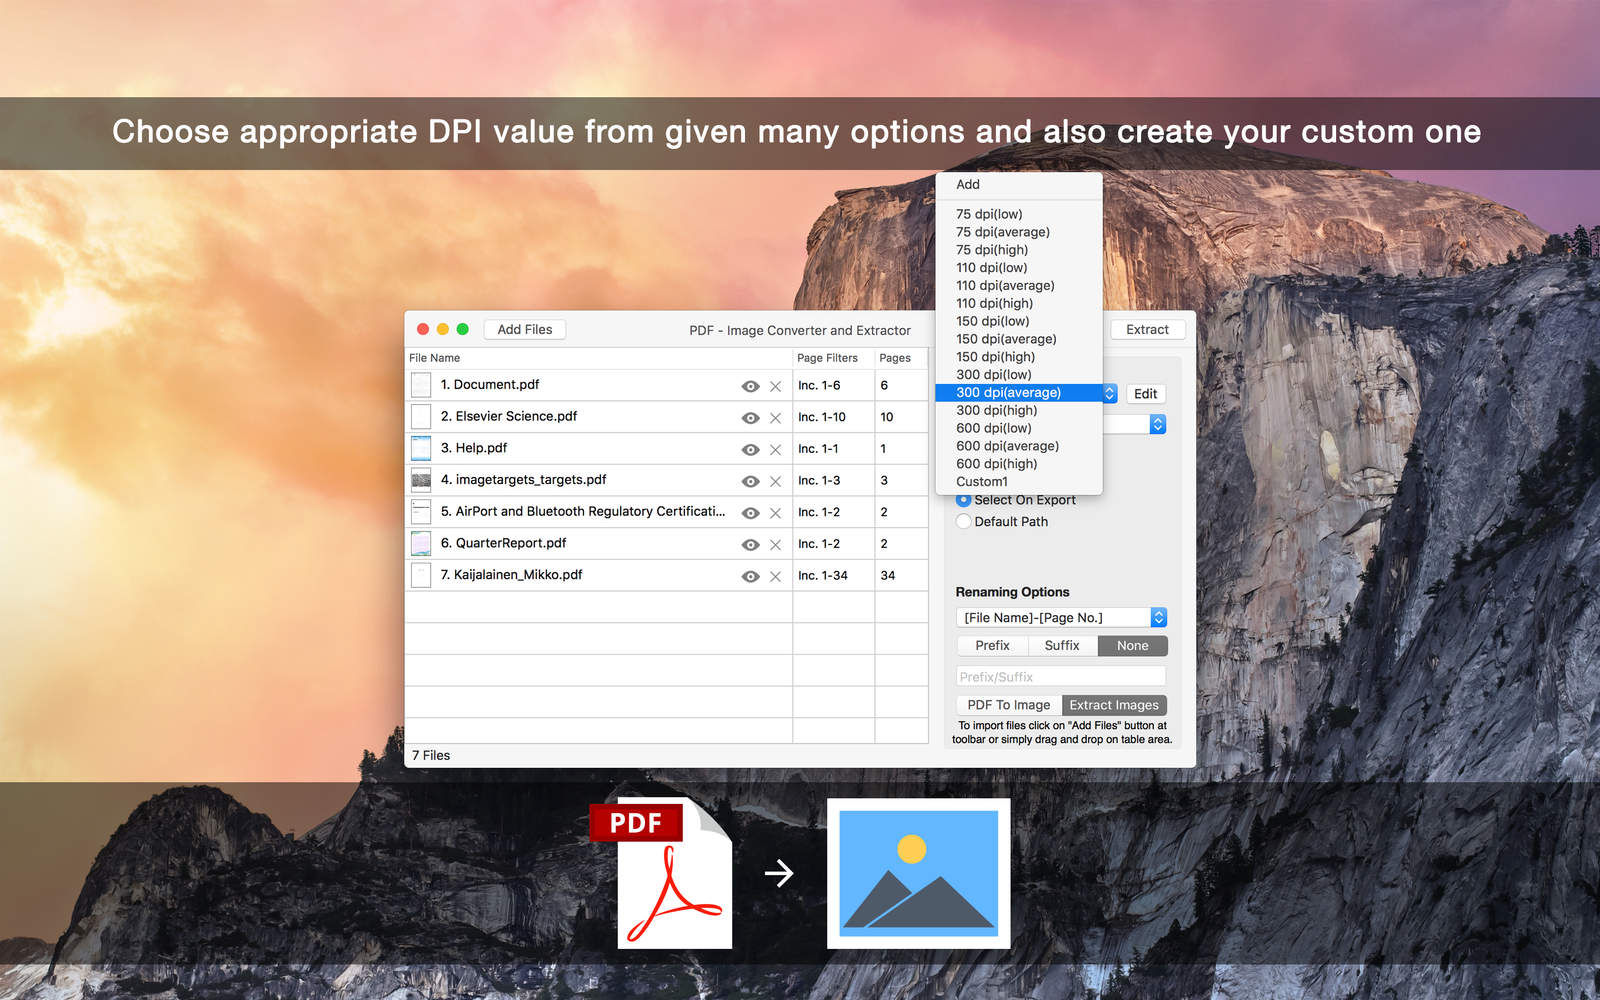 PDF - Image Converter and Extractor 1.2 : Main Window